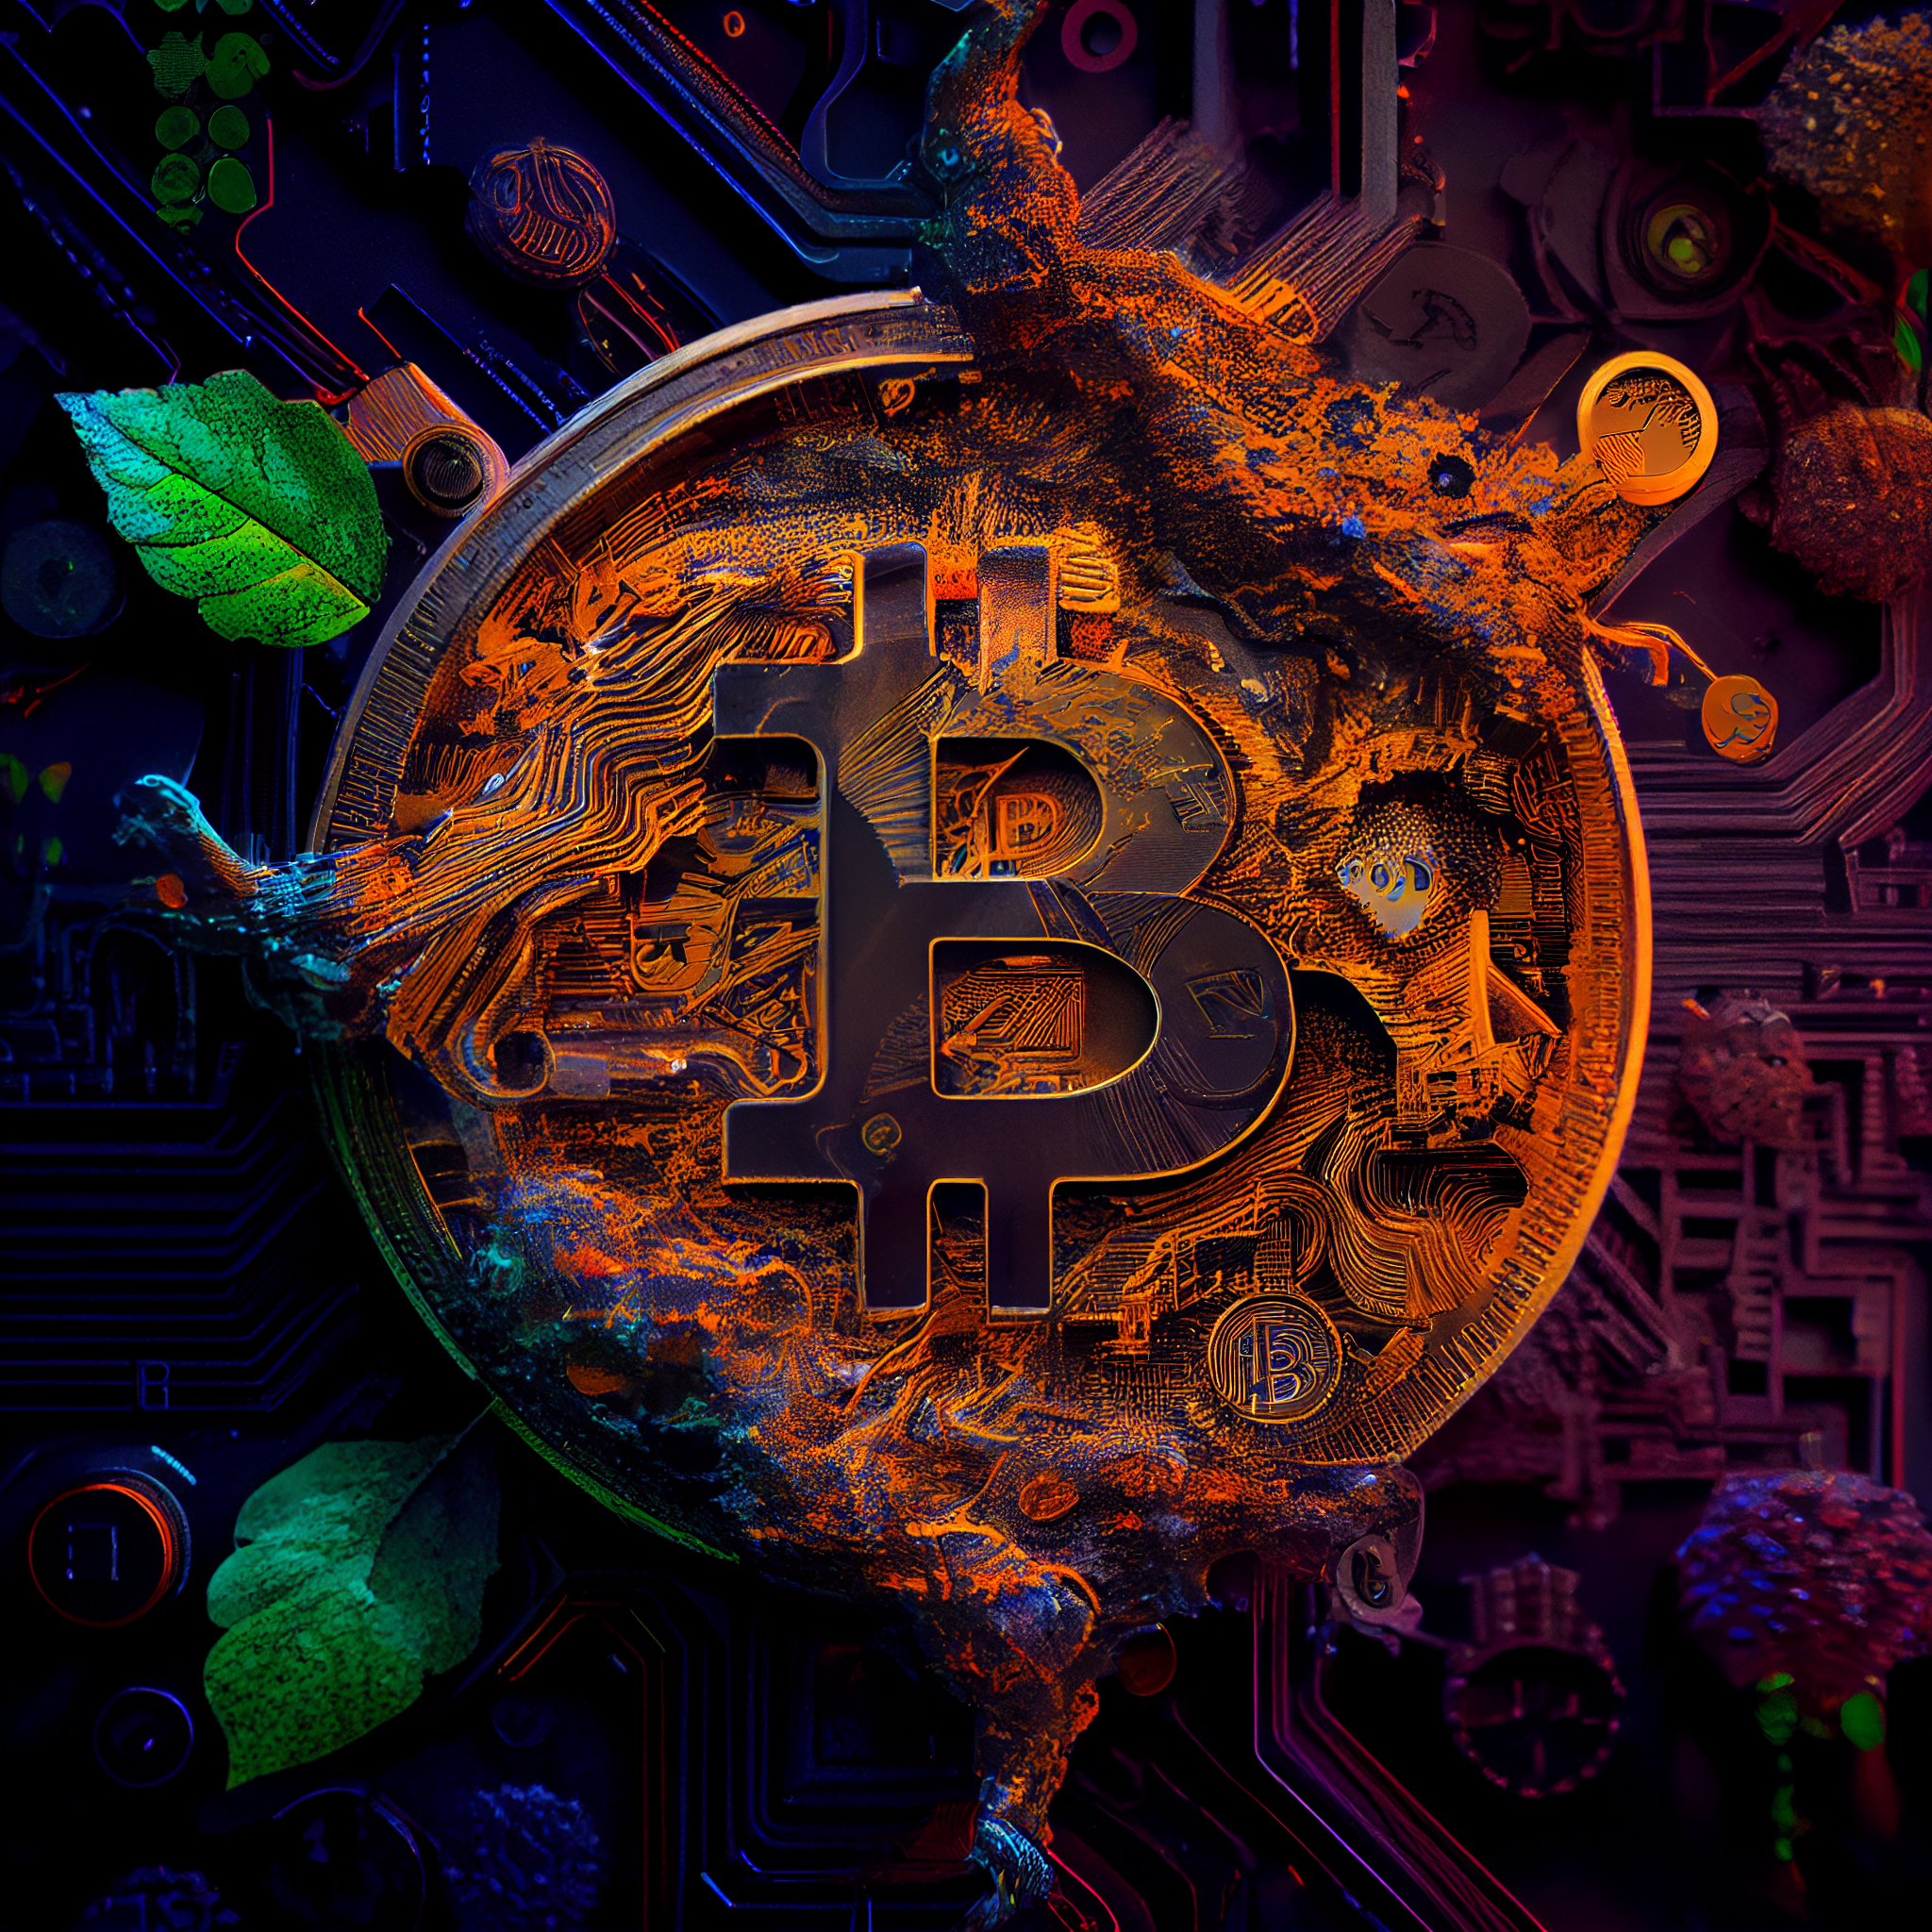 Beggars_Bitcoin_stability_hyper_details_rich_colors_photograph_8158c52971be45088c86cebbac4ae922.png